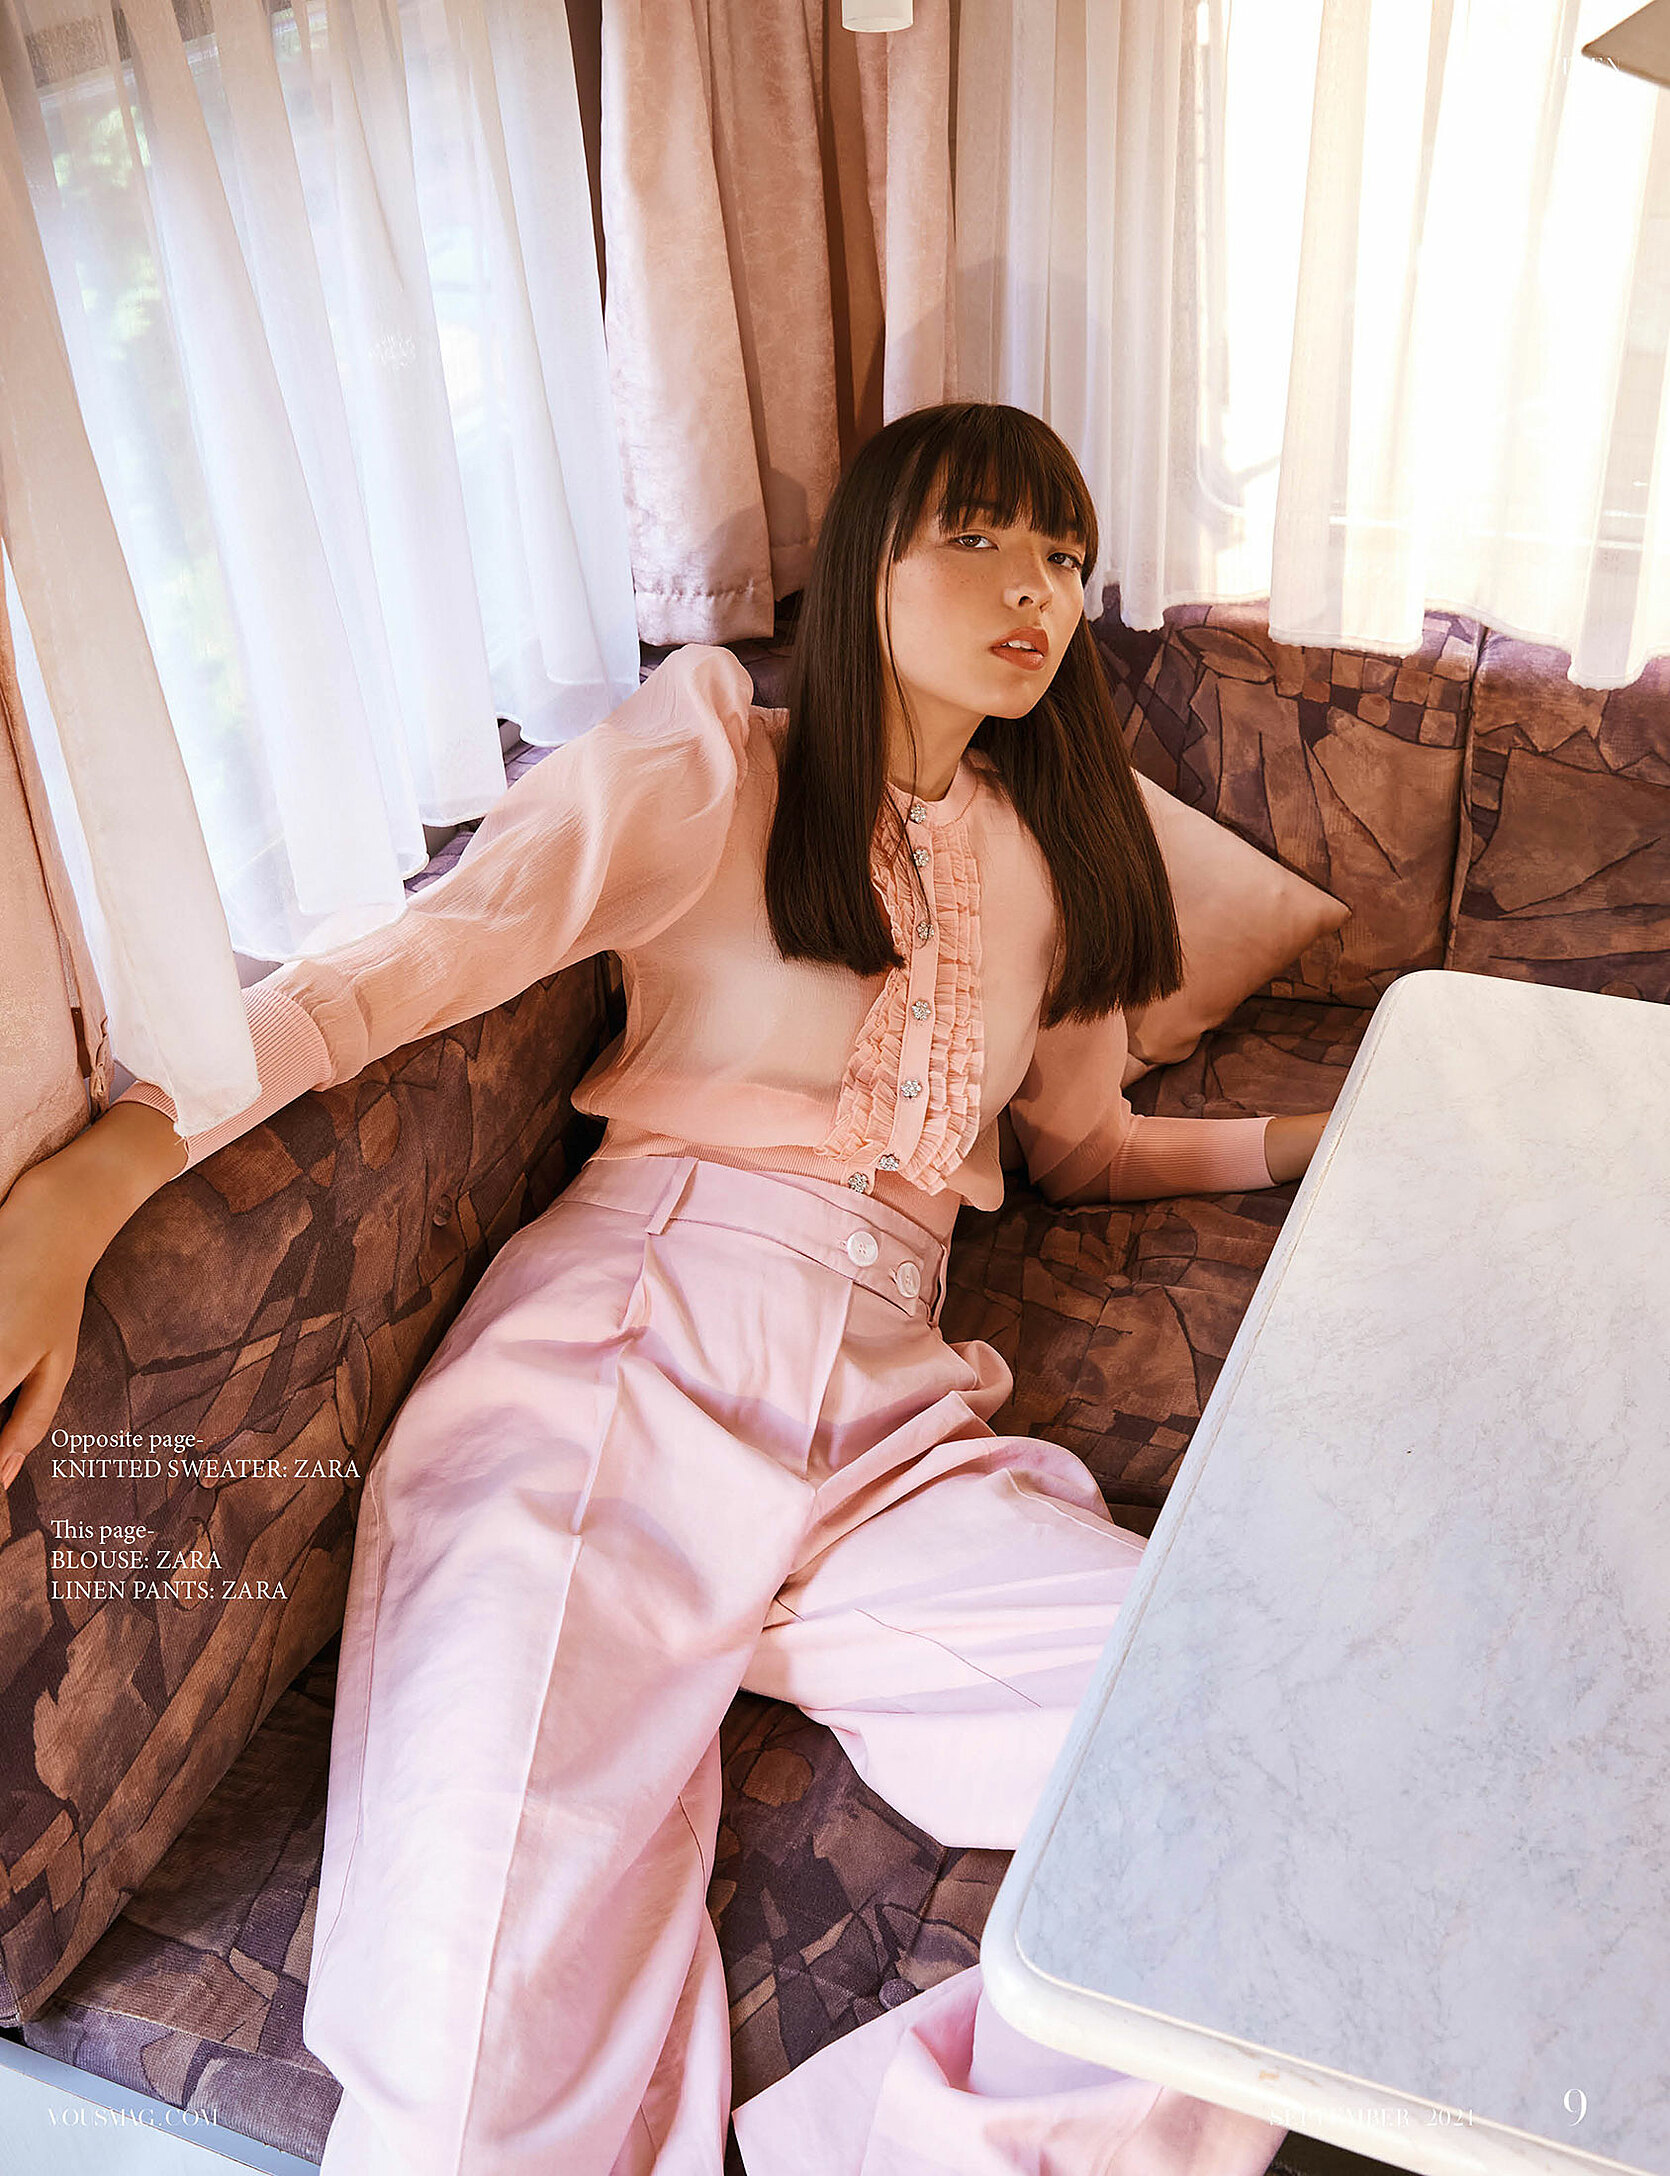 A model in a rose outfit who lie in the dining area in the camping car